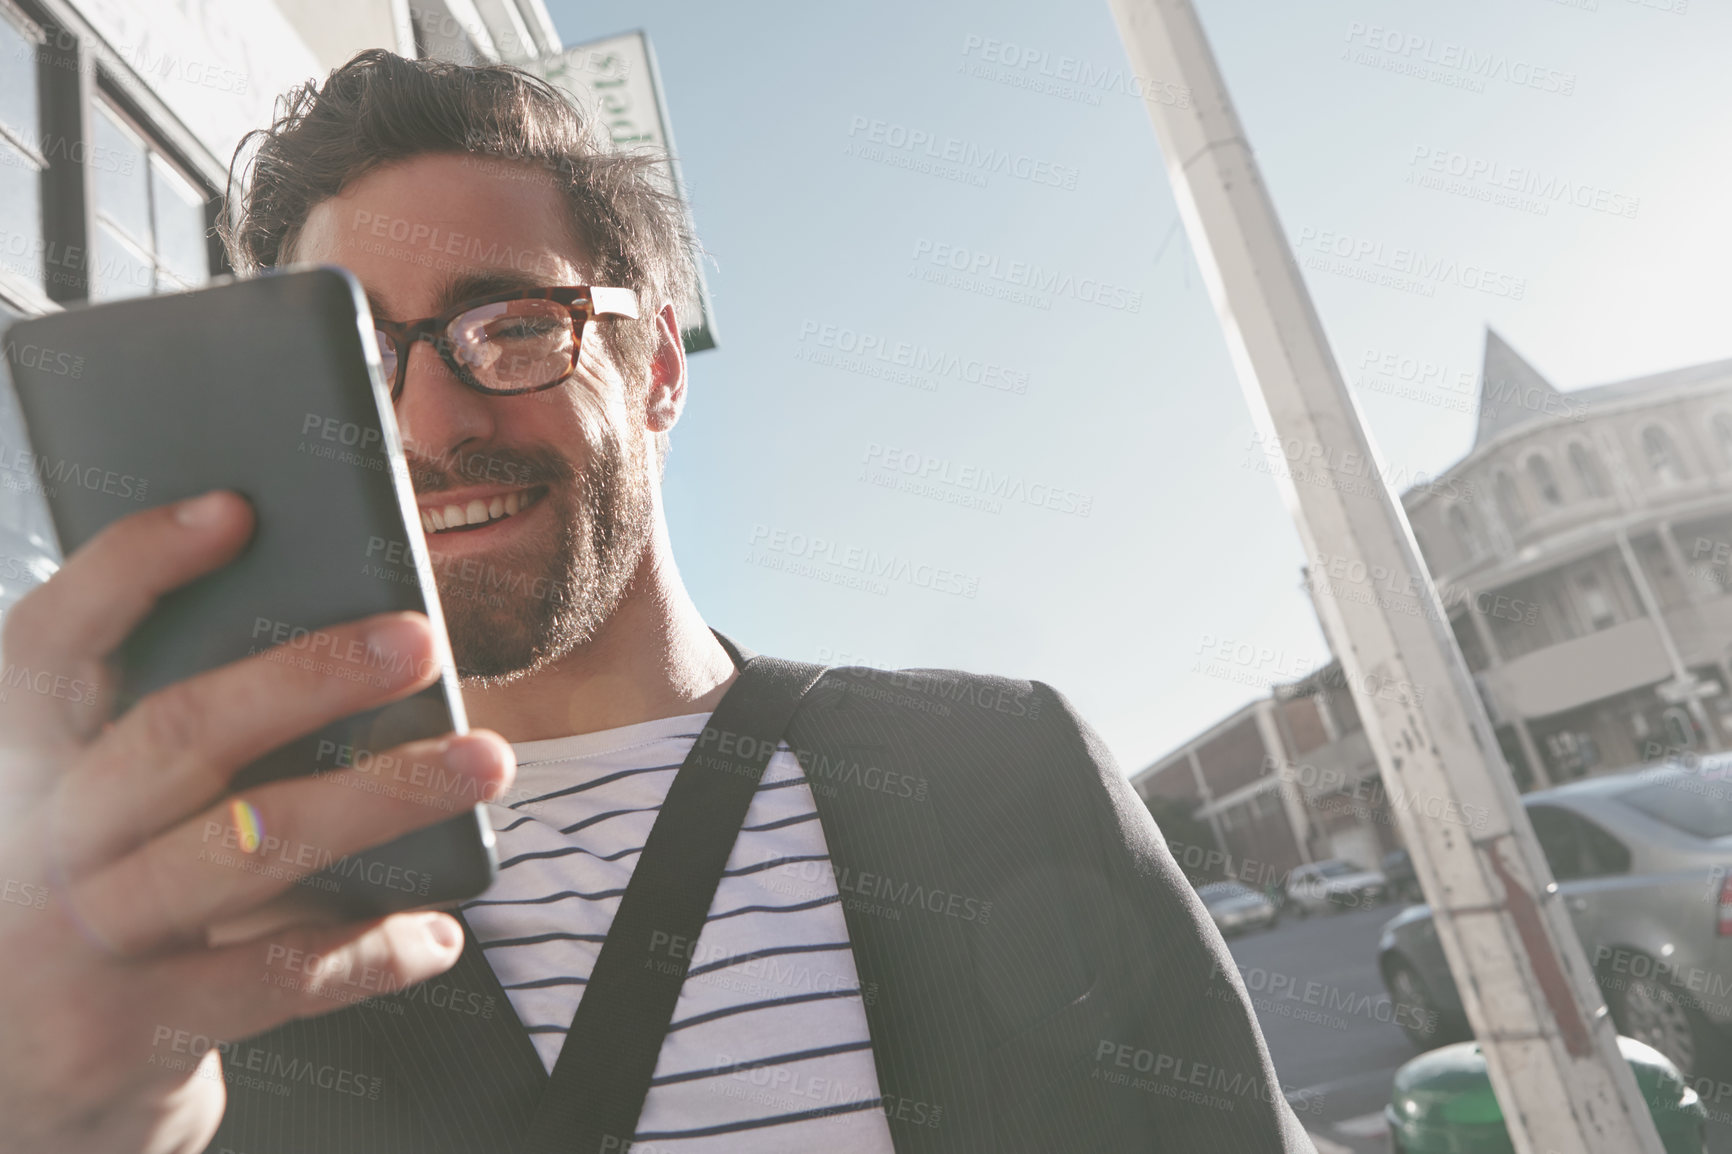 Buy stock photo Shot of a stylish young man using a cellphone while walking in the city